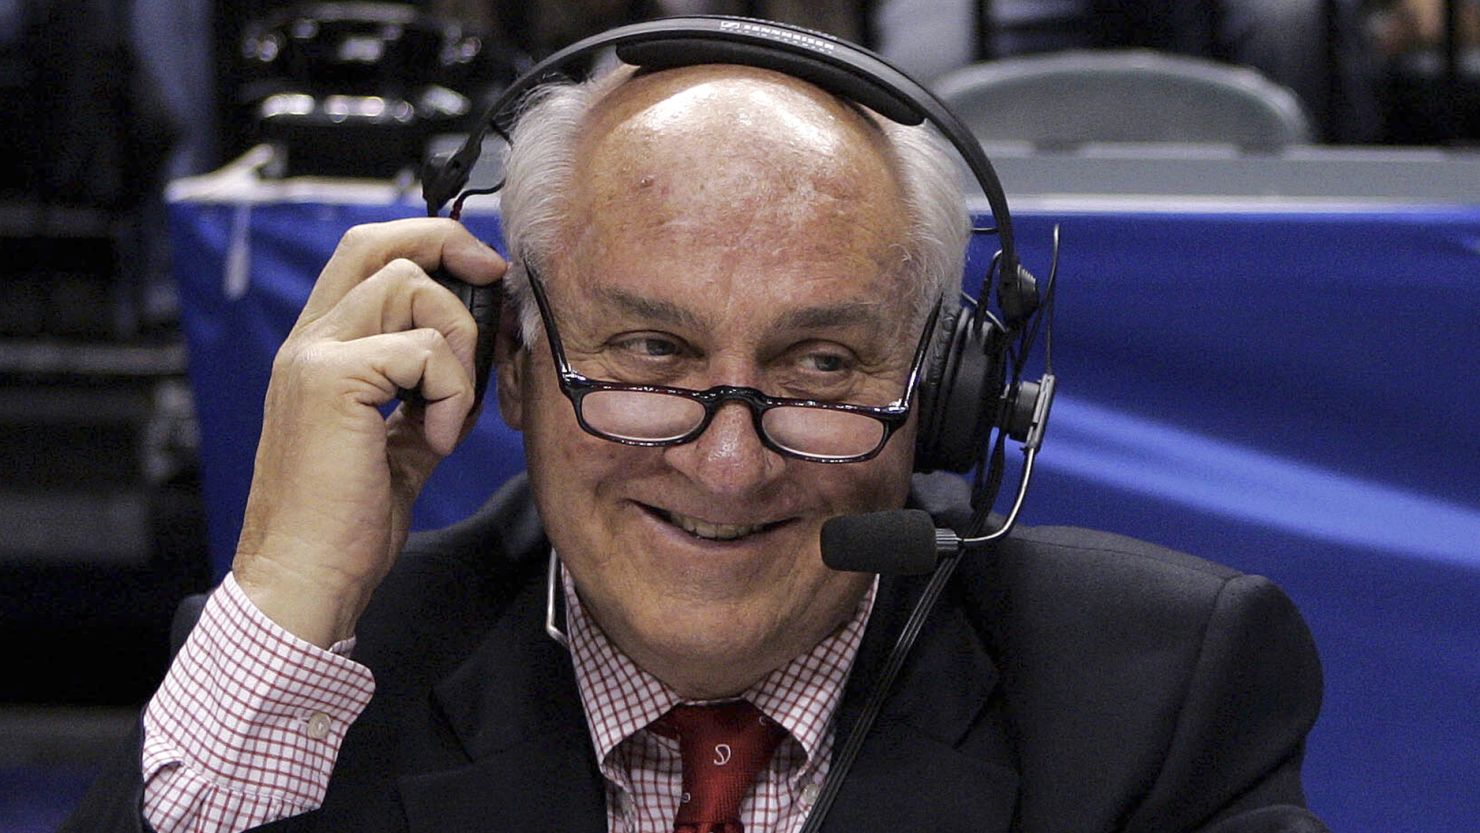  Billy Packer, an Emmy award-winning college basketball broadcaster who covered 34 Final Fours for NBC and CBS, seen here in 2006, died on January 26. 
